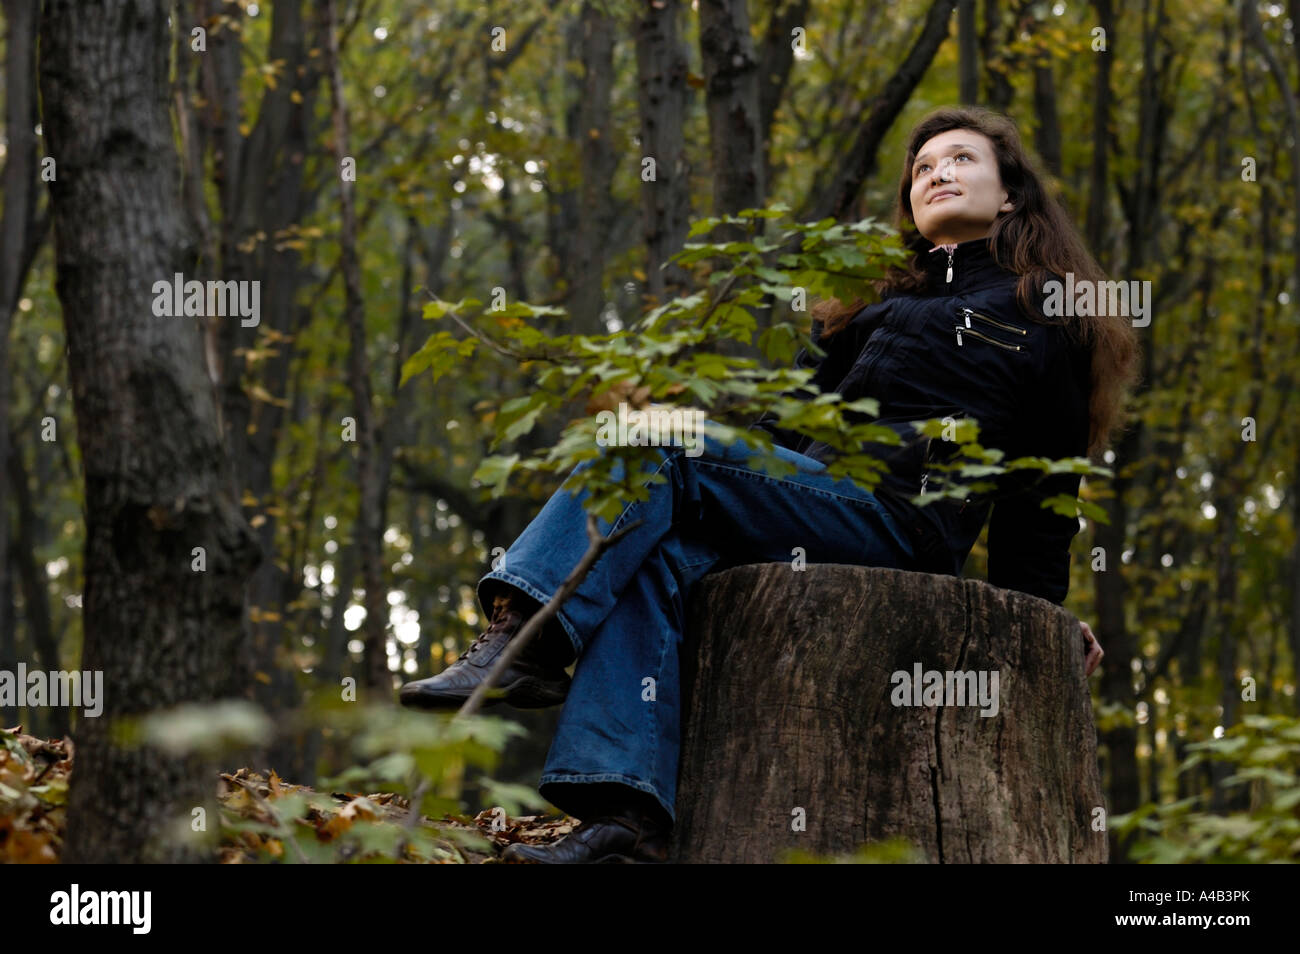 Young romantic woman in a forest Stock Photo